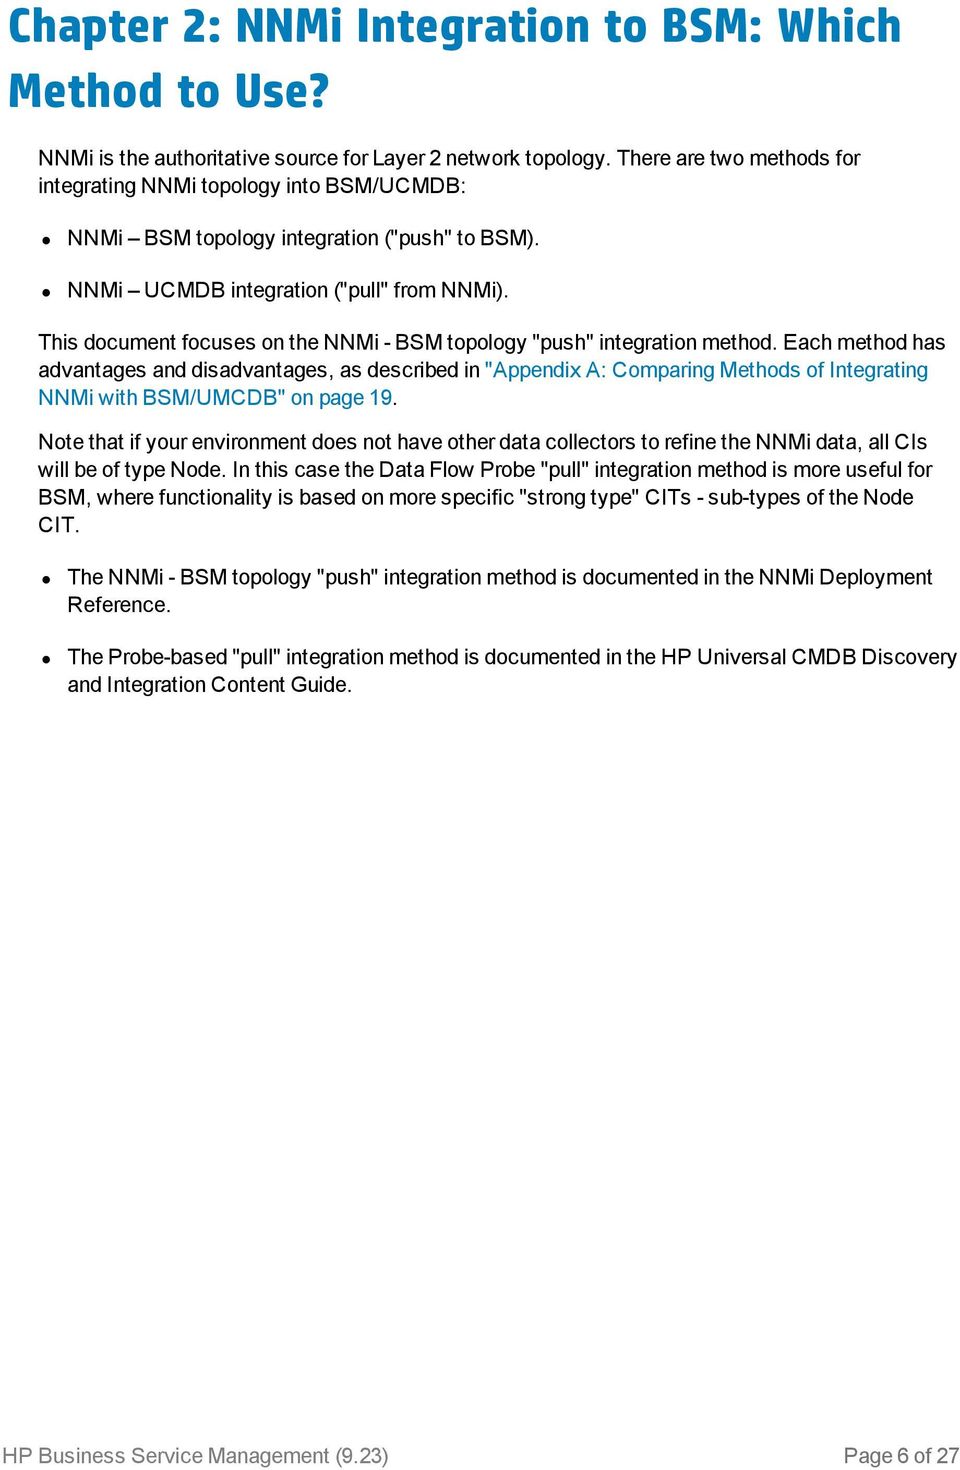 This document focuses on the NNMi - BSM topology "push" integration method.